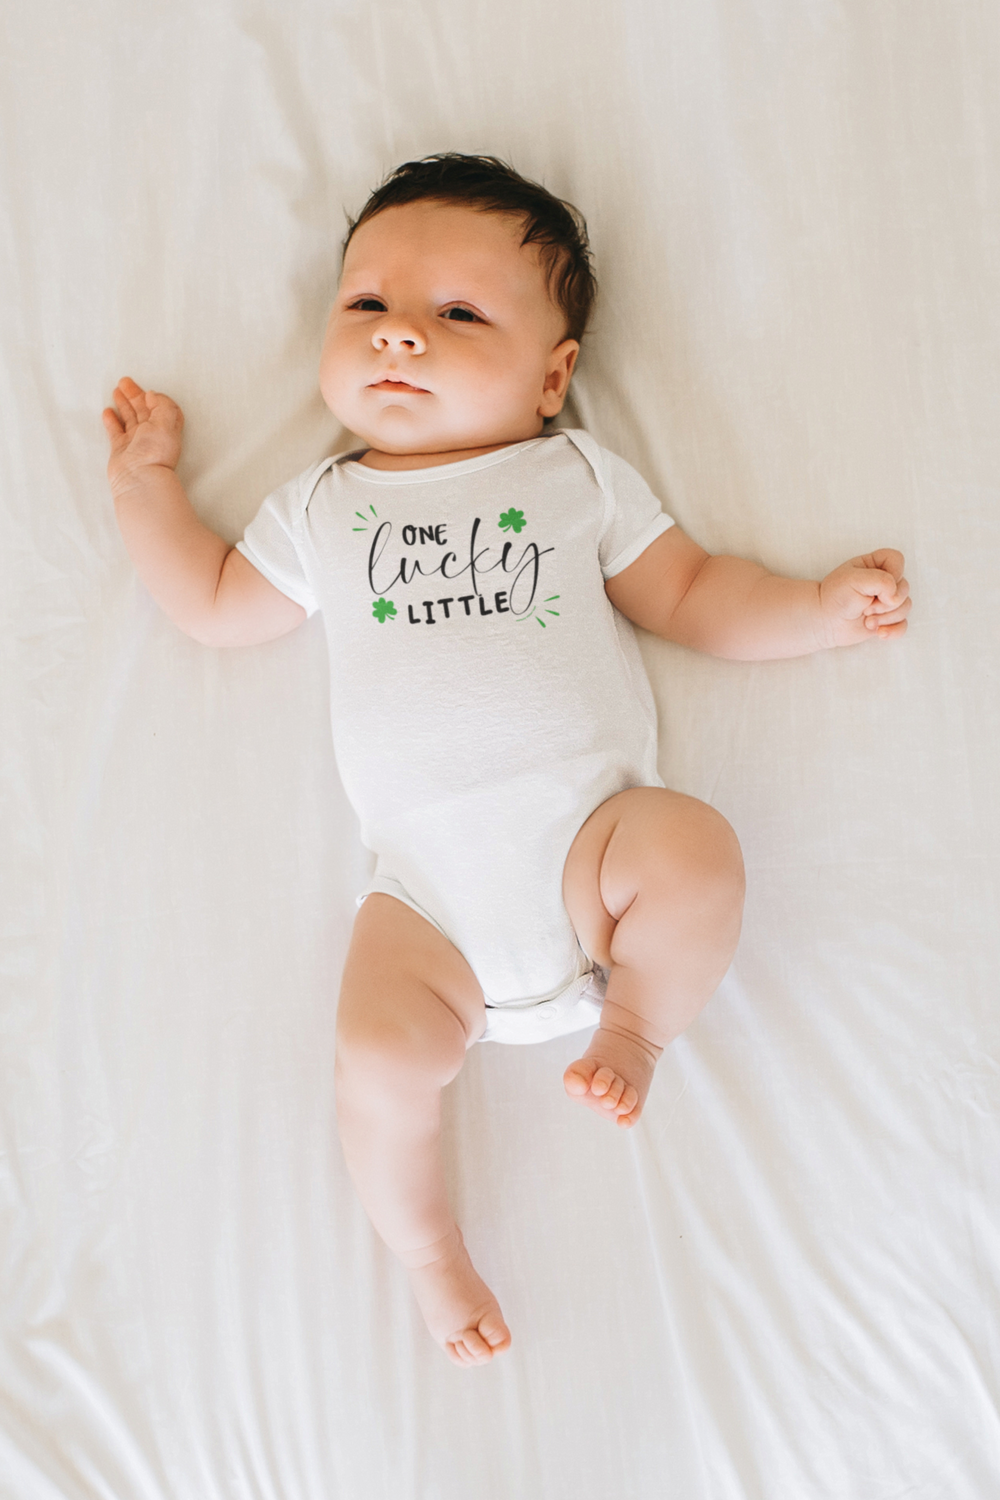 A baby bodysuit featuring One Lucky Little design. 100% cotton fabric, ribbed knitting for durability, plastic snaps for easy changing. Infant fine jersey, light fabric, tear away label.